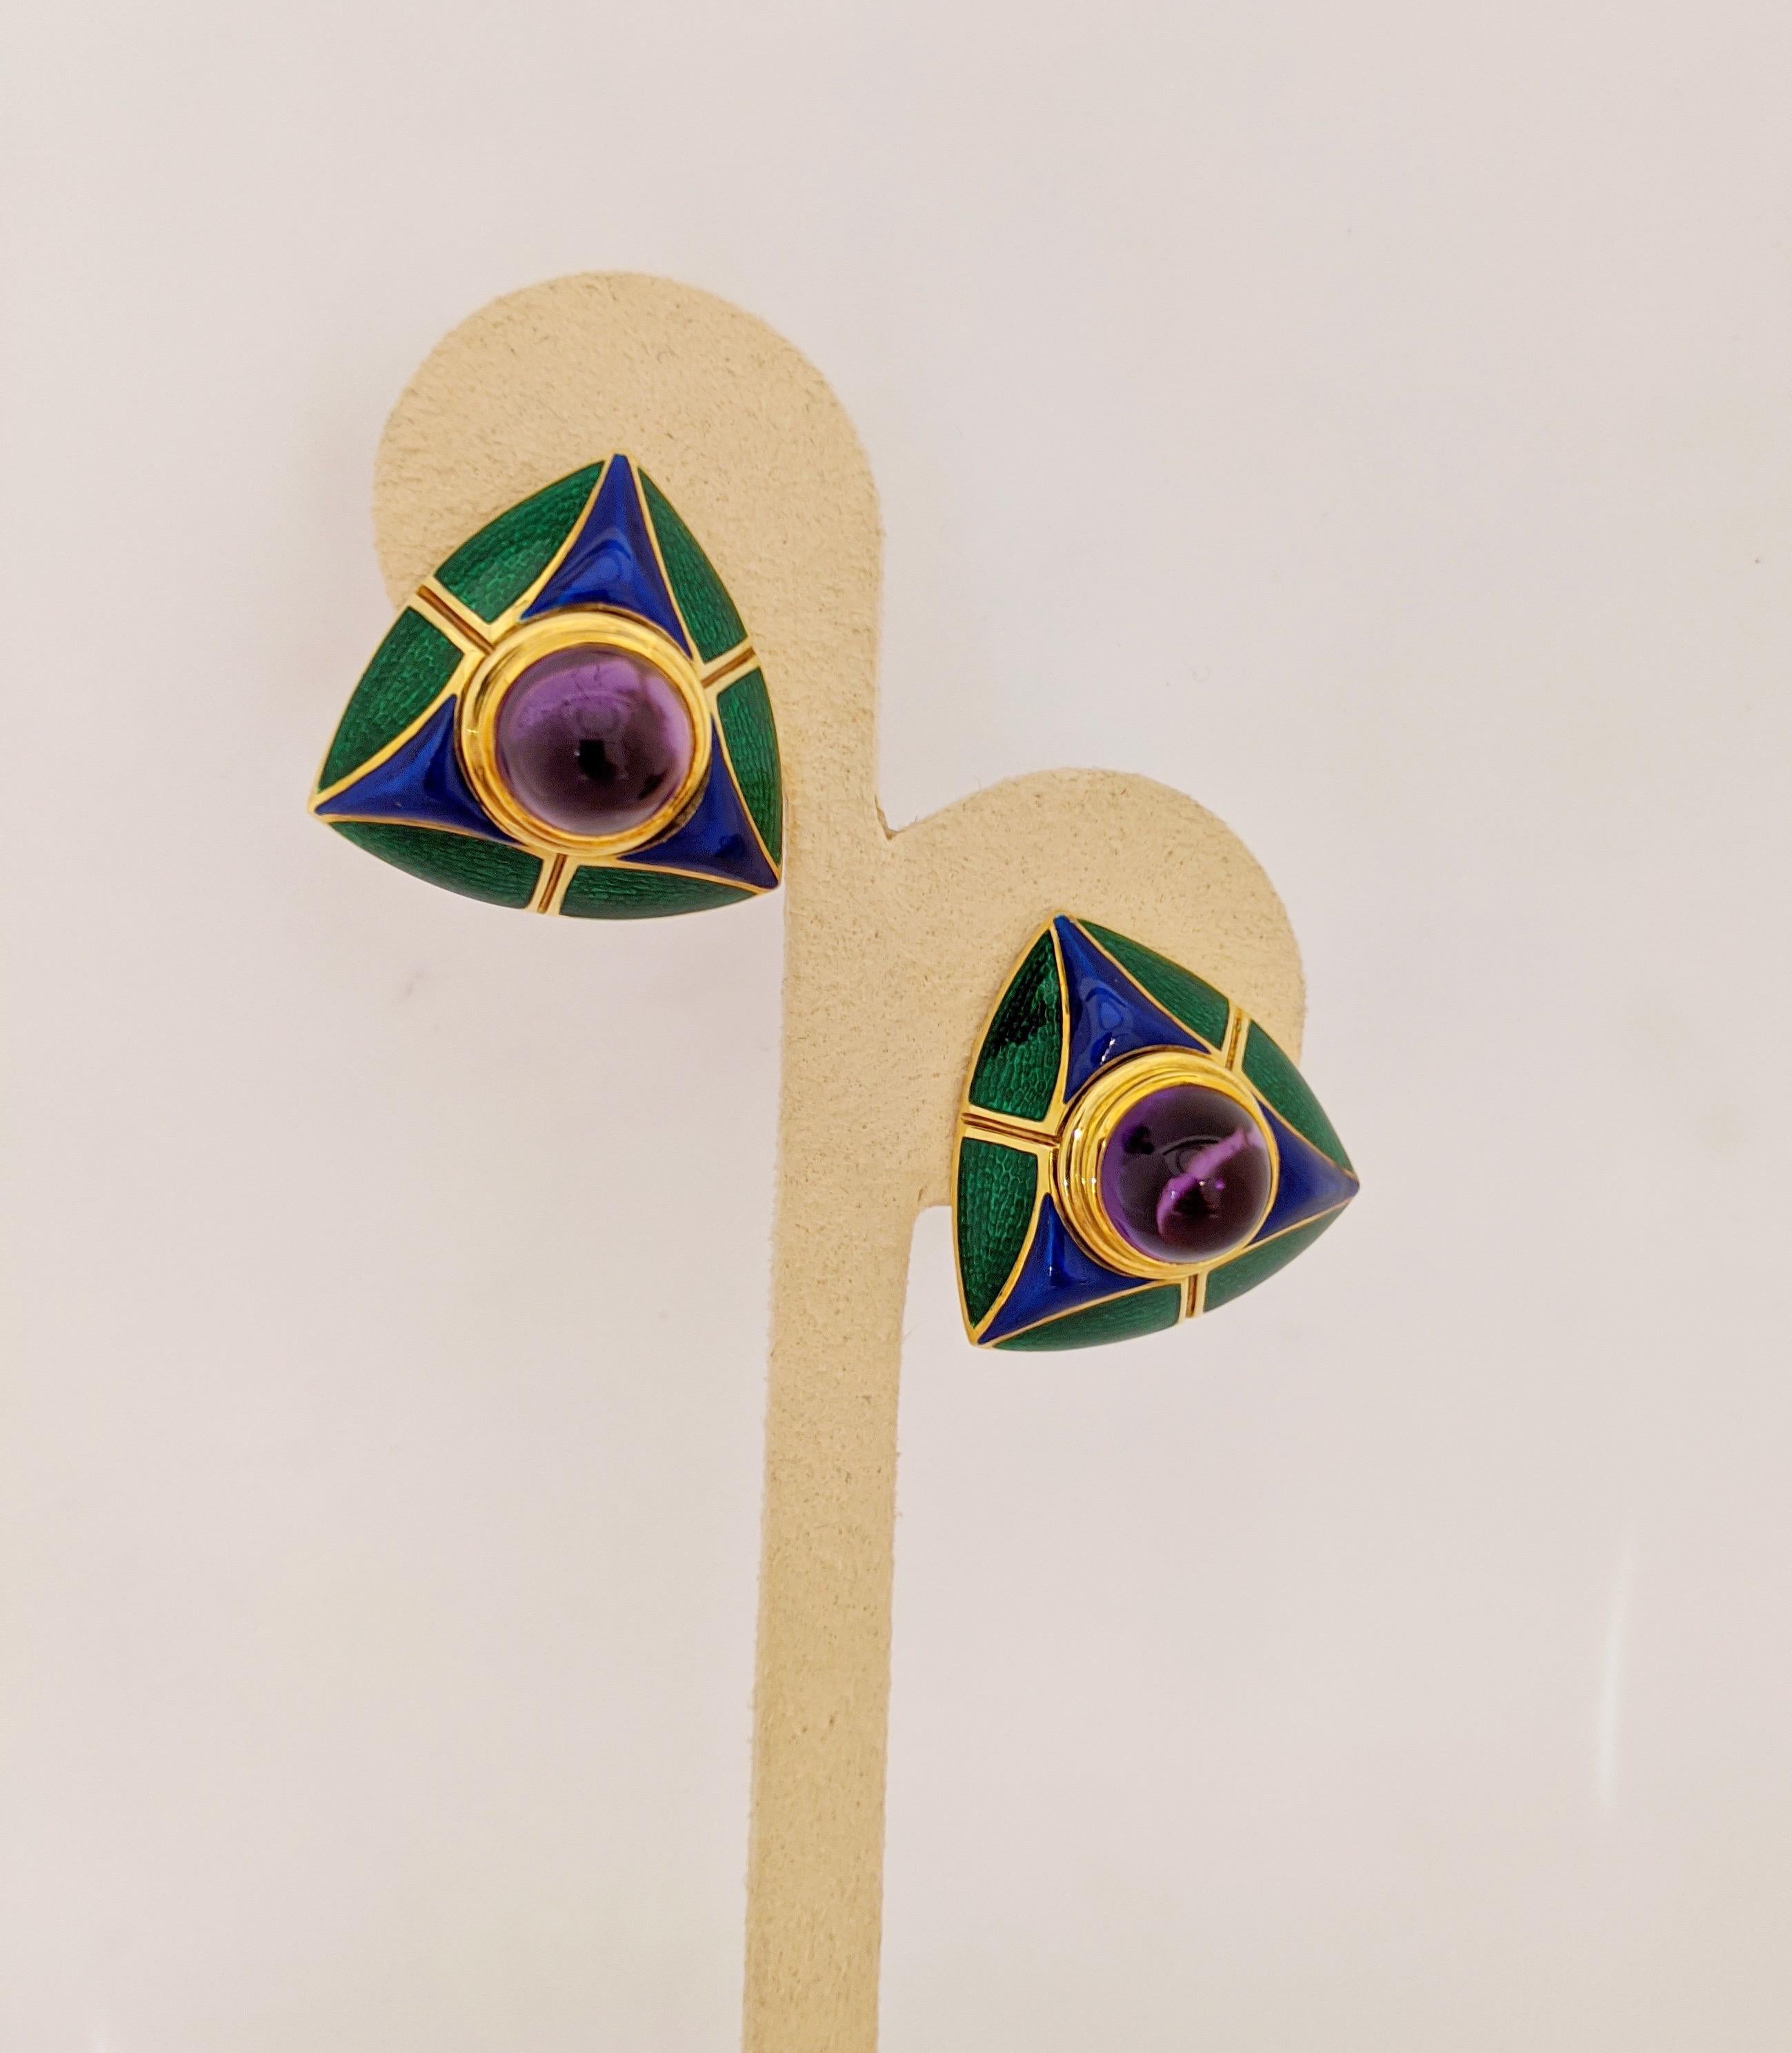 These triangular shaped earrings are 18 karat yellow gold and feature round cabachon Amethyst centers. The earrings have a geometric pattern of blue and green enamel. The green enamel portion has been beautifully guiocheled for added depth. The